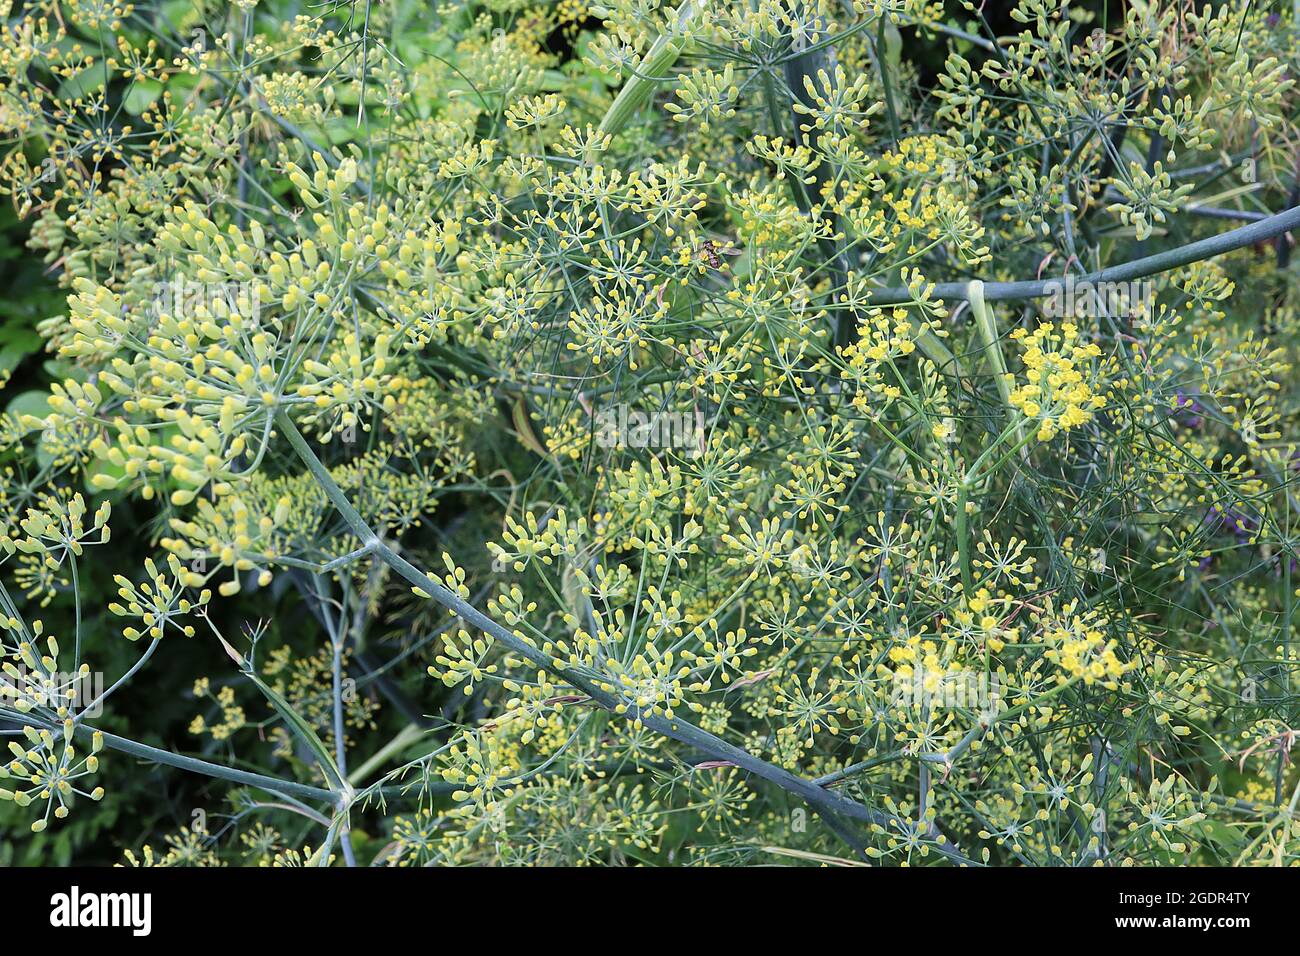 Foeniculum vulgare common fennel – umbels of tiny yellow flowers and grey green hair-like leaves on tall thick stems,  July, England, UK Stock Photo